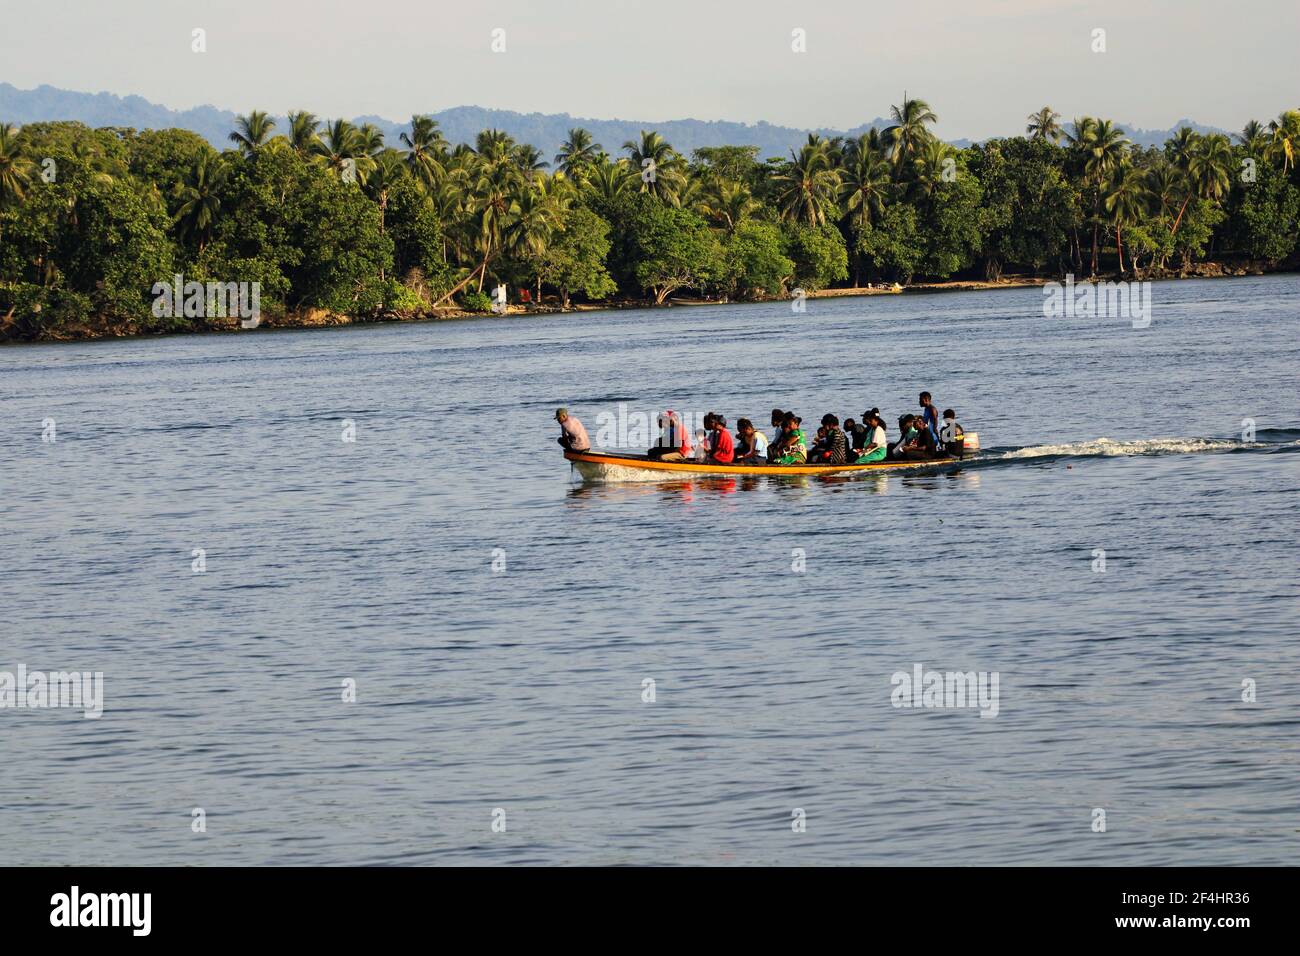 A boatload of passengers being ferried from Kranket Island to Madang town in a fiberglass dinghy. Stock Photo